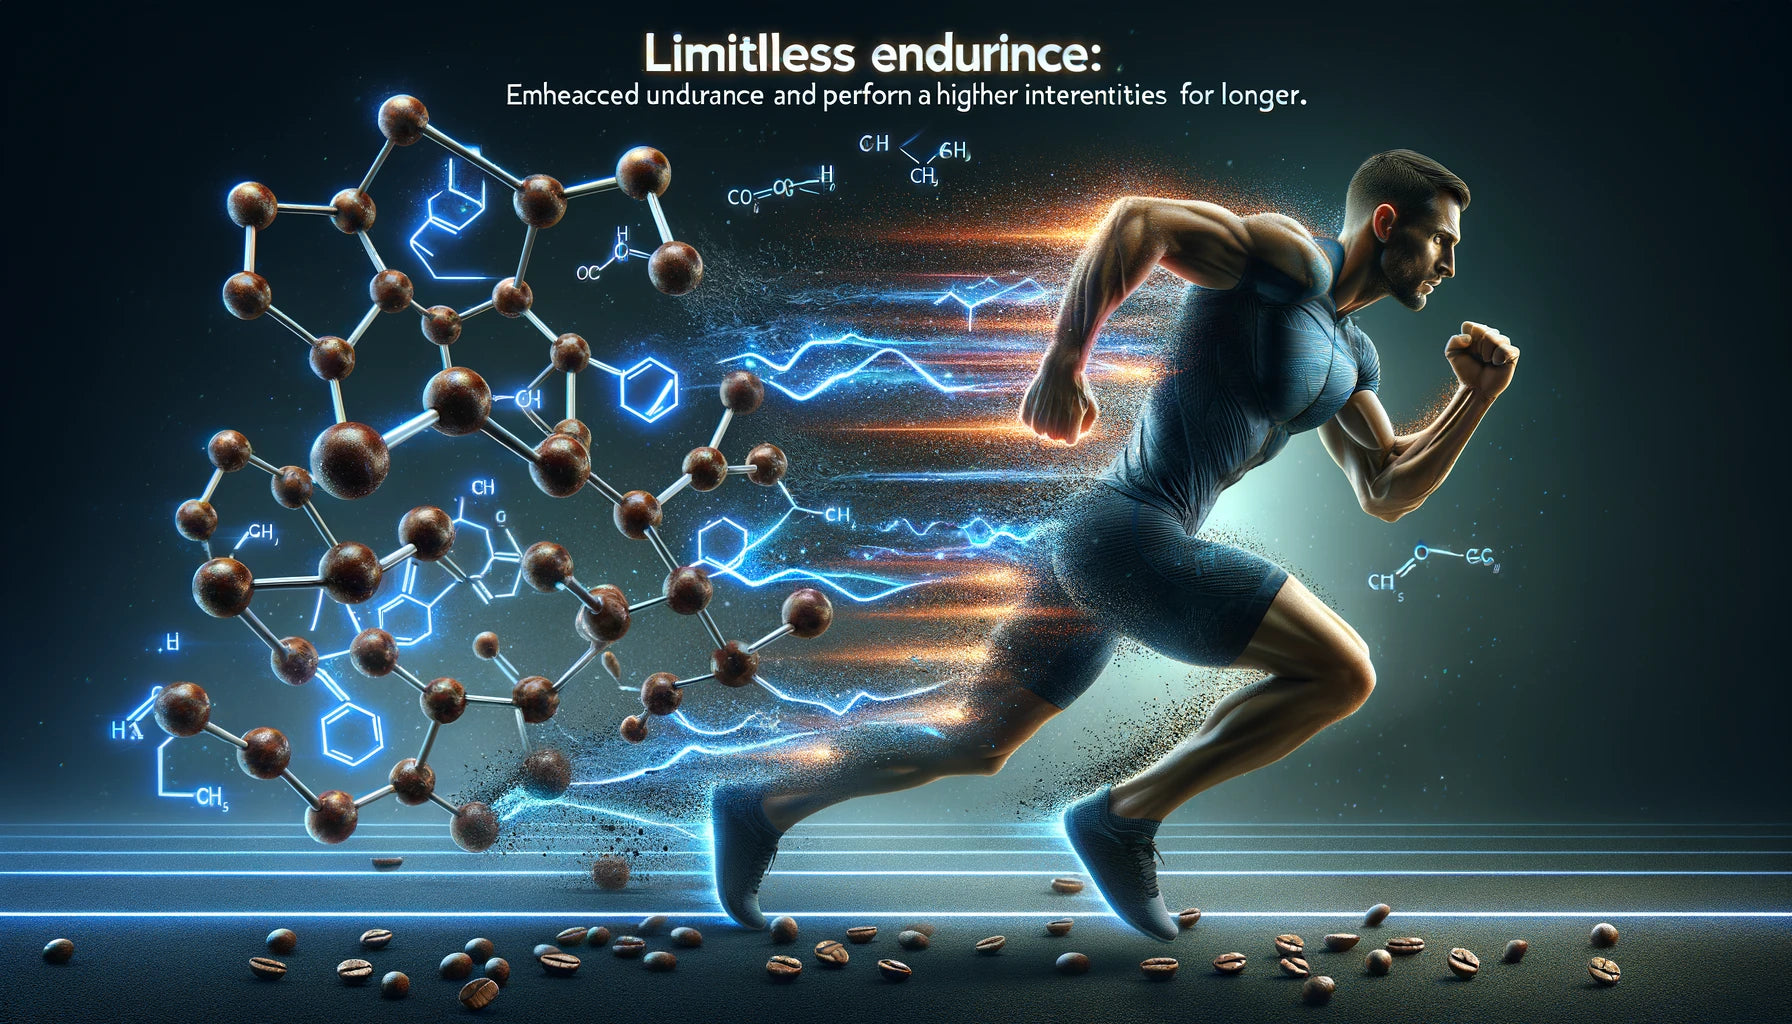 Limitless Endurance - An athlete mid-performance with a trail of creatine and coffee molecules boosting their energy, depicting the enhanced endurance.